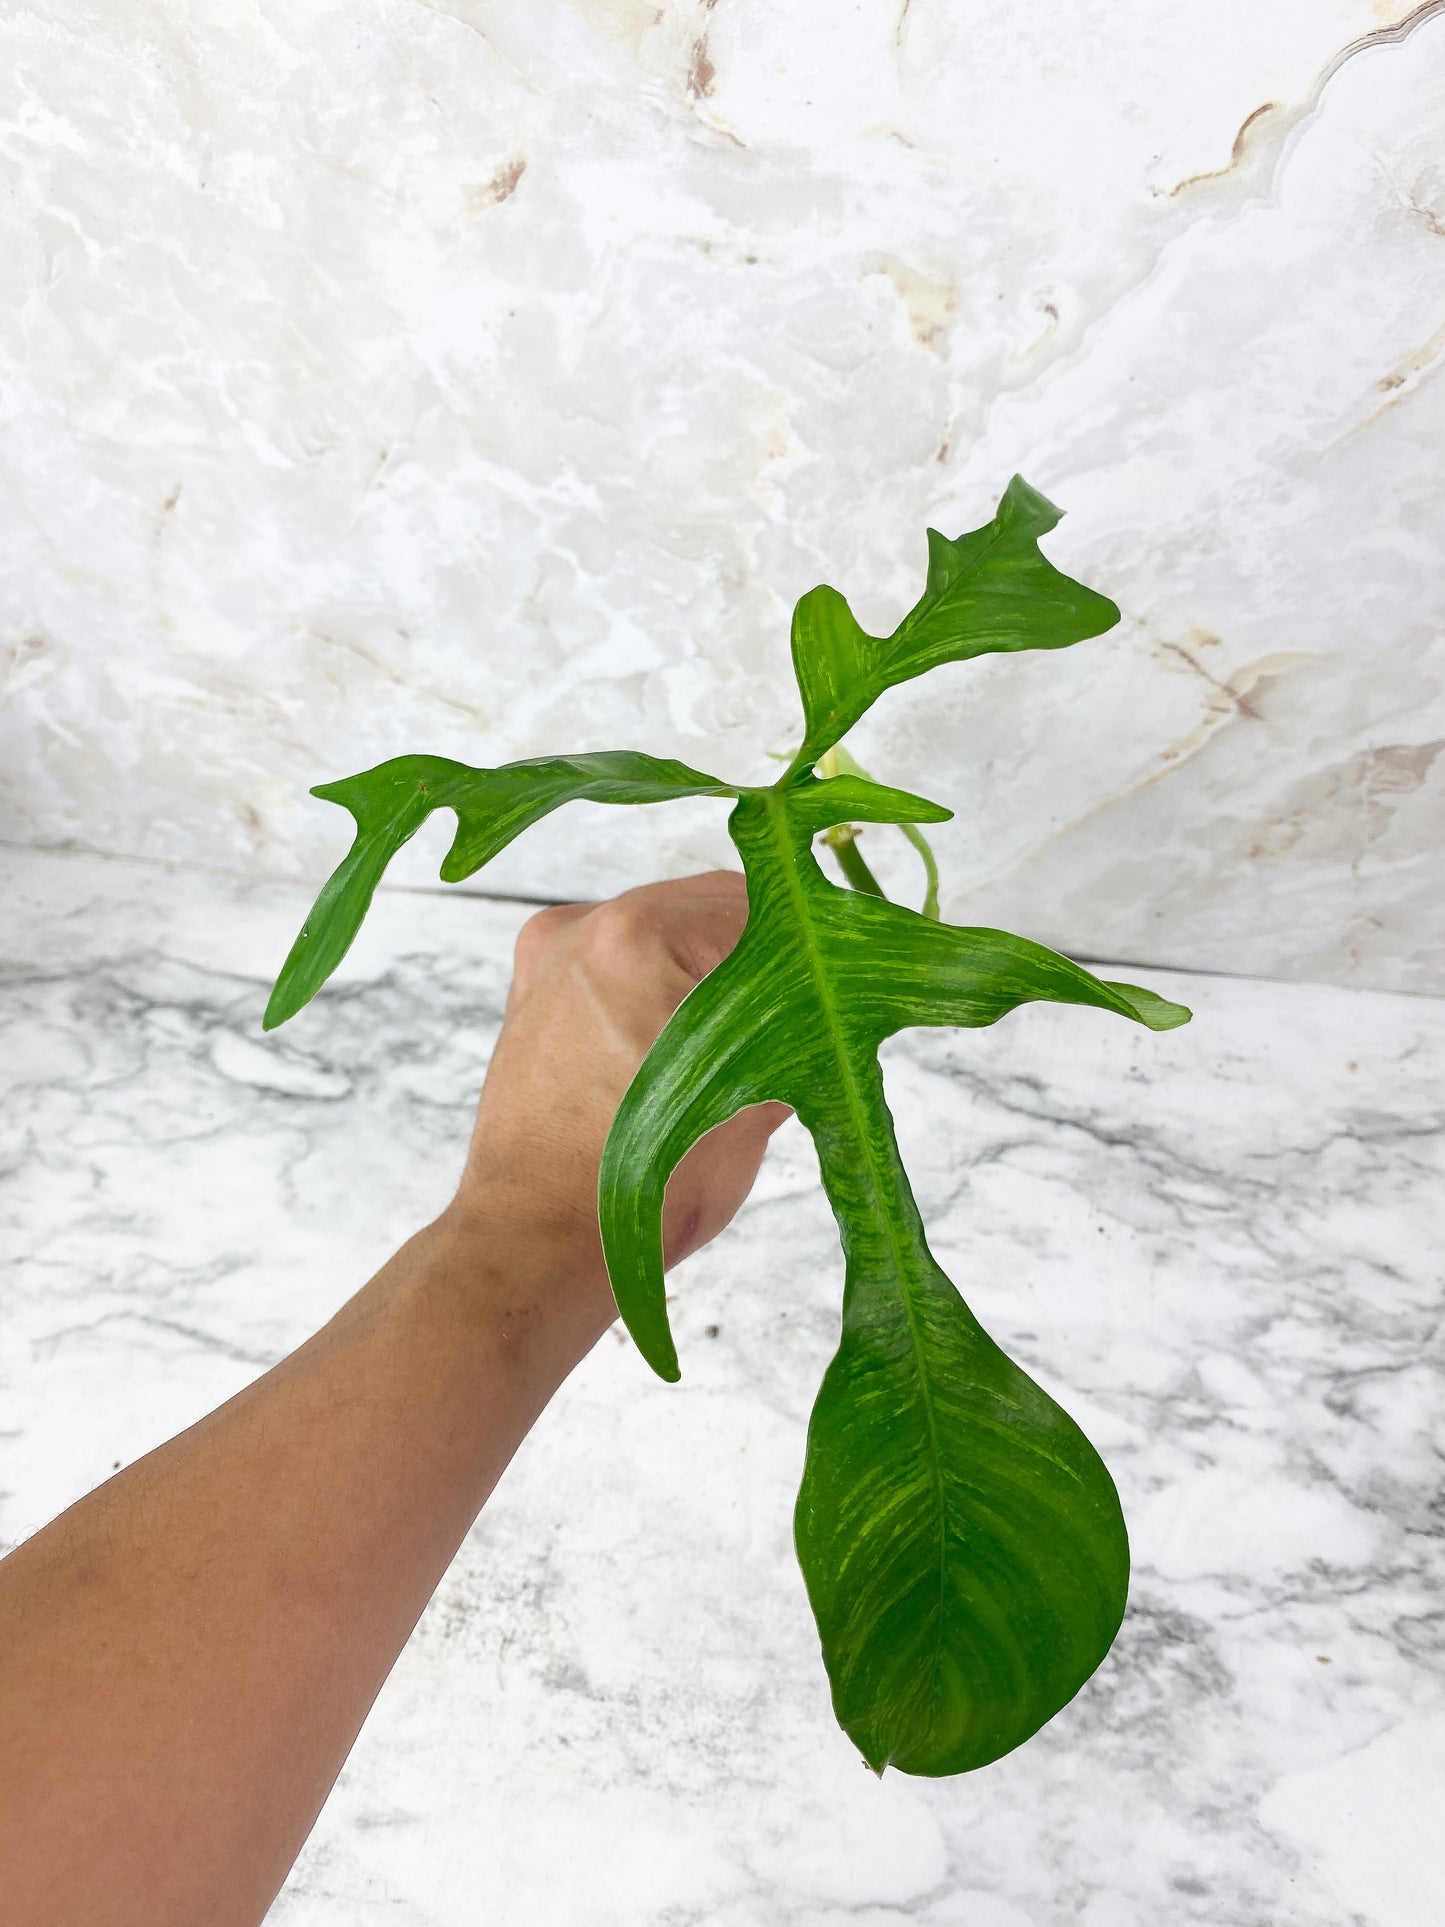 Philodendron Glad Hand Rooting Top cutting. 2 leaves, 1 sprout